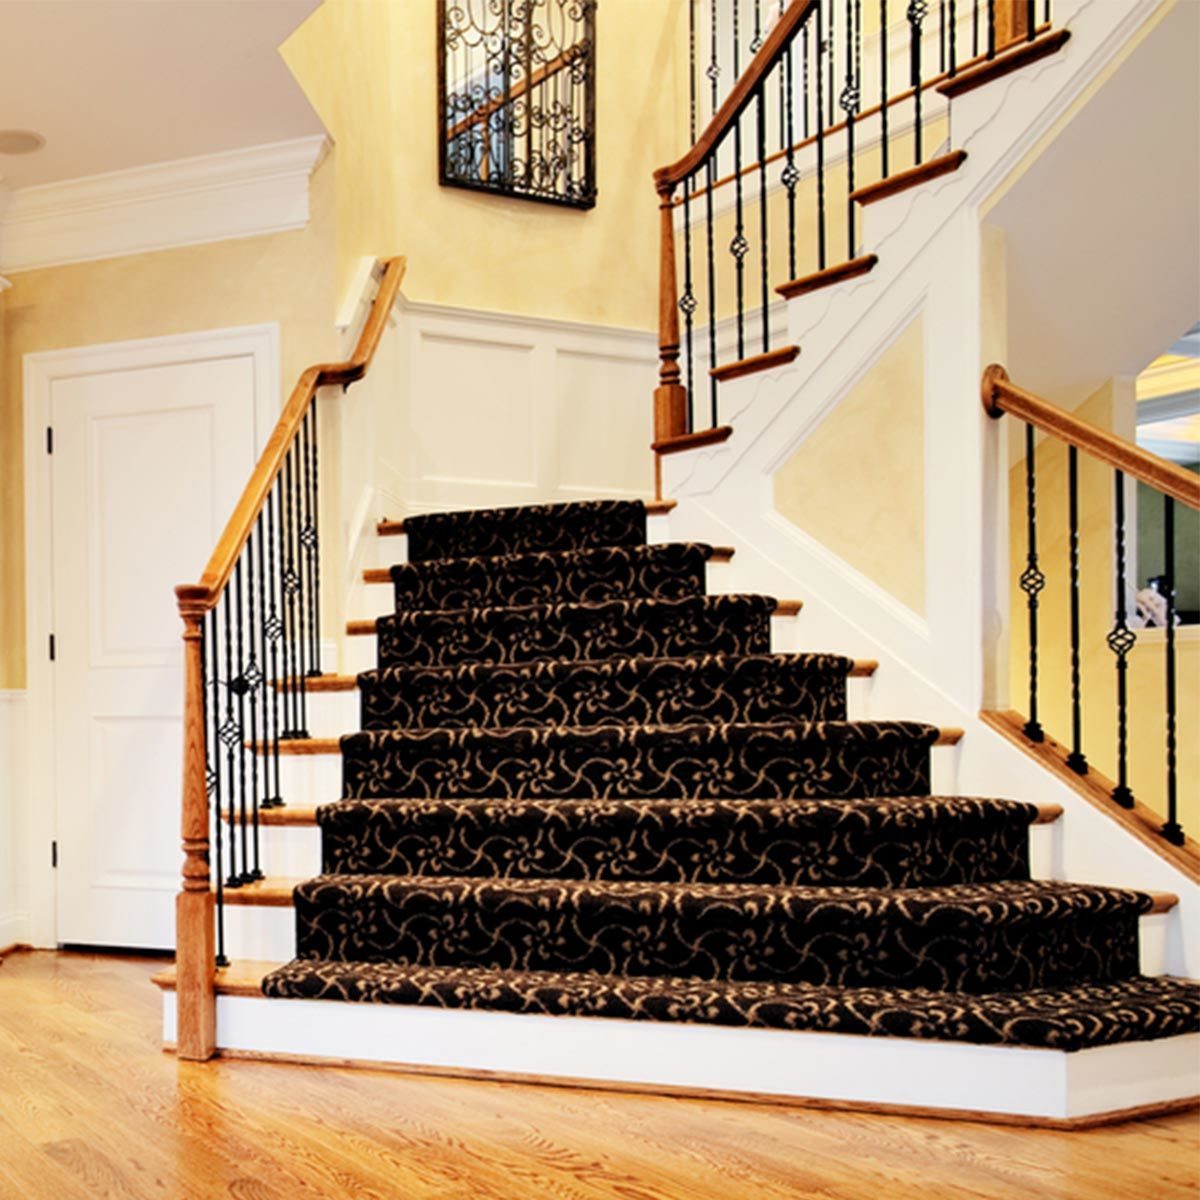 Got Stairs? Liven Them Up